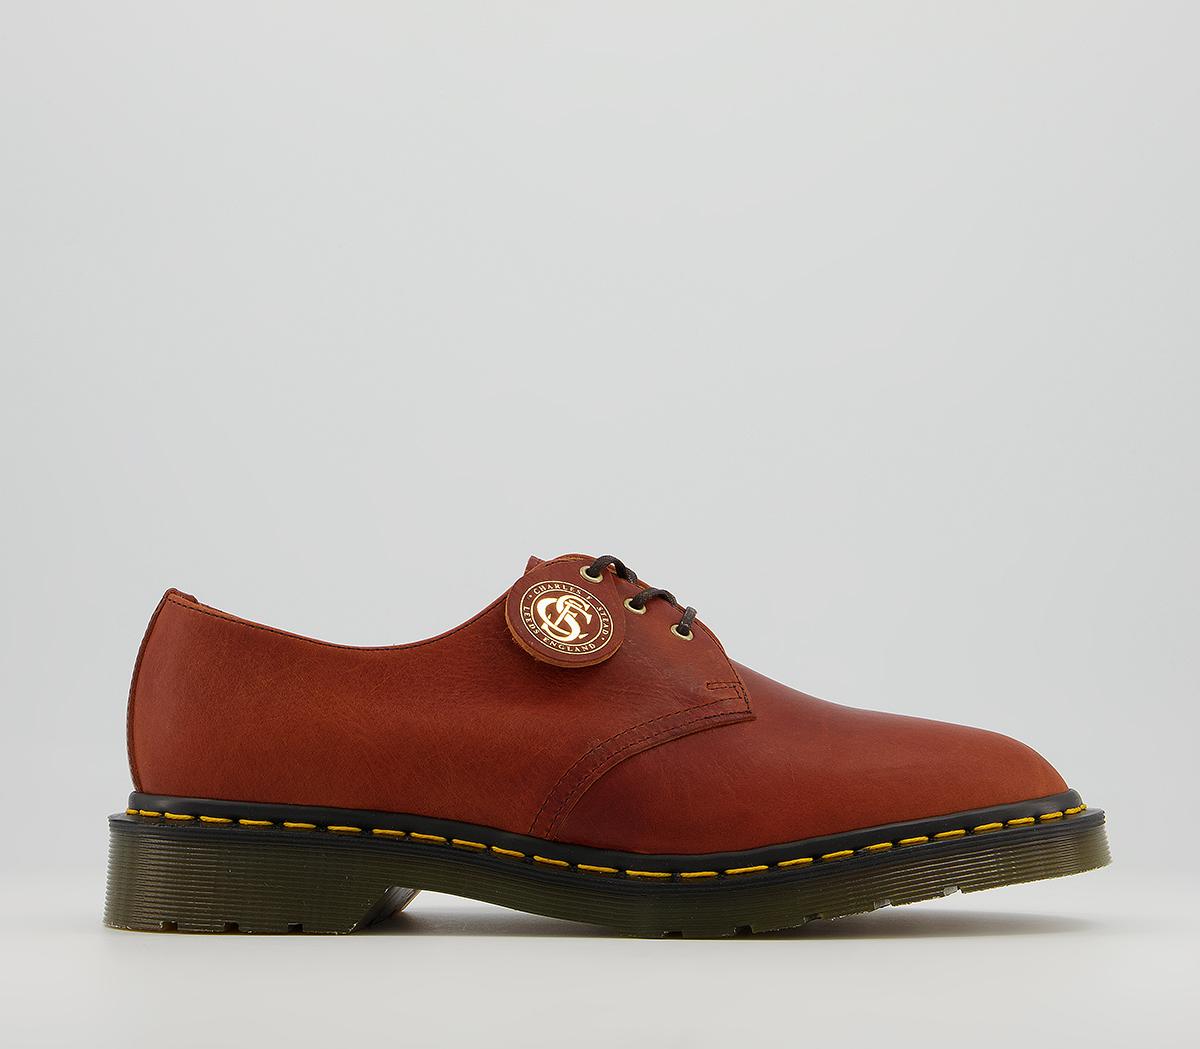 Dr. Martens1461 3 Eye Mie ShoesDark Tan Classic Oiled Shoulder